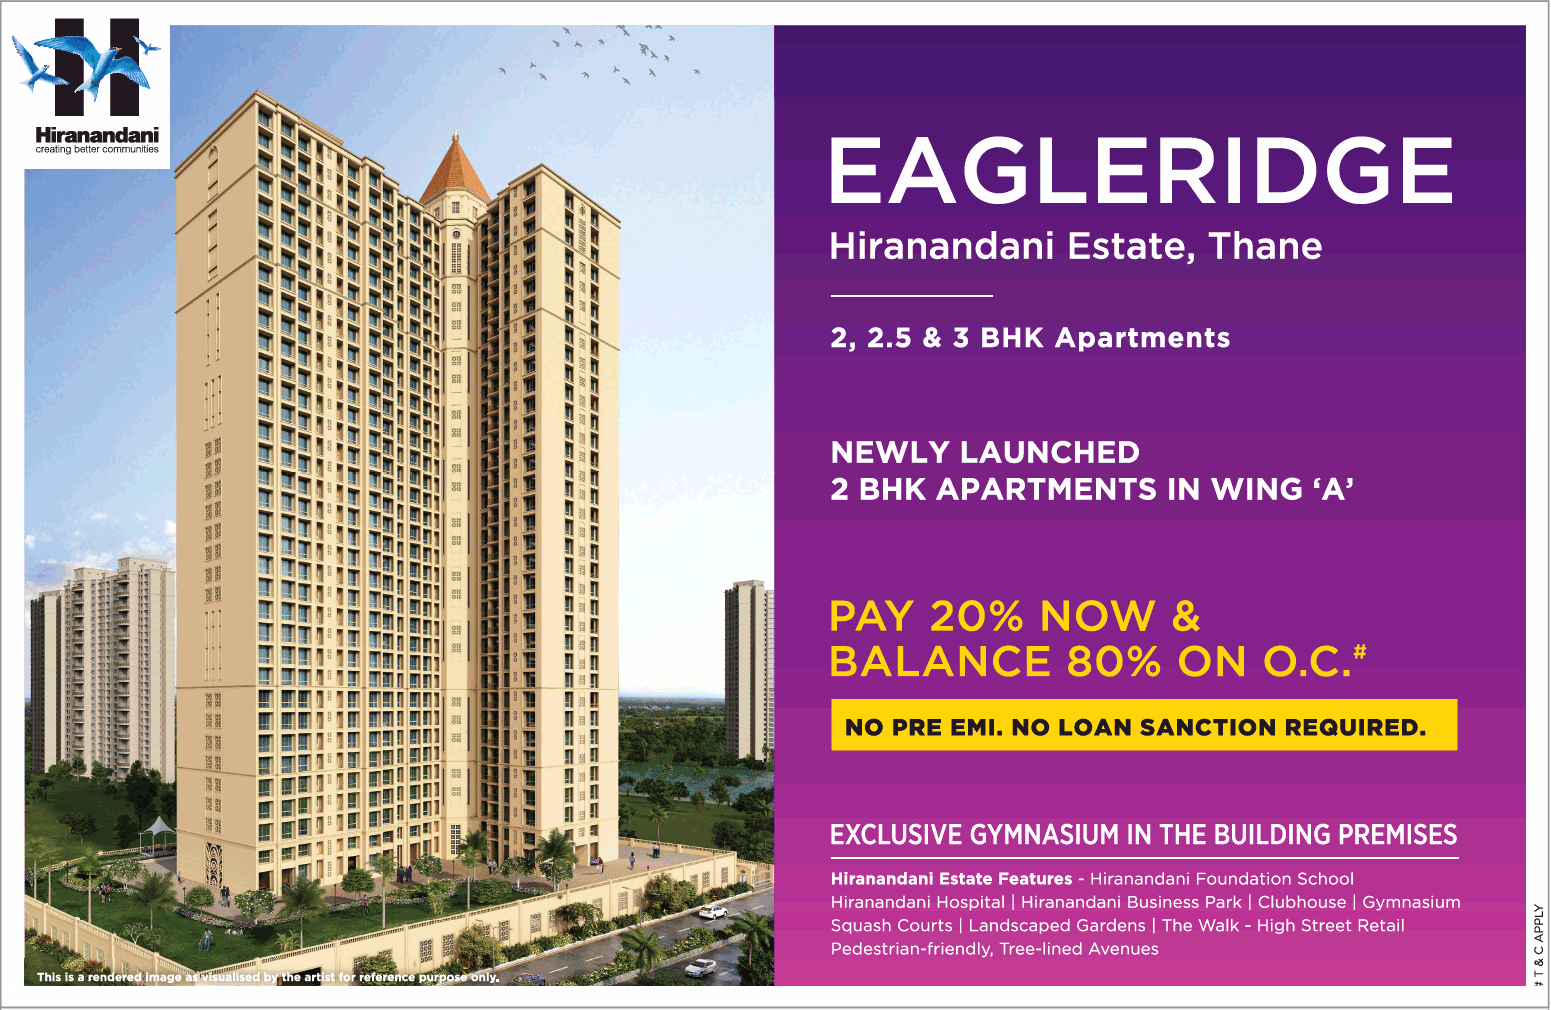 Hiranandani Eagleridge newly launched 2 bhk apartment in Wing A in Mumbai Update